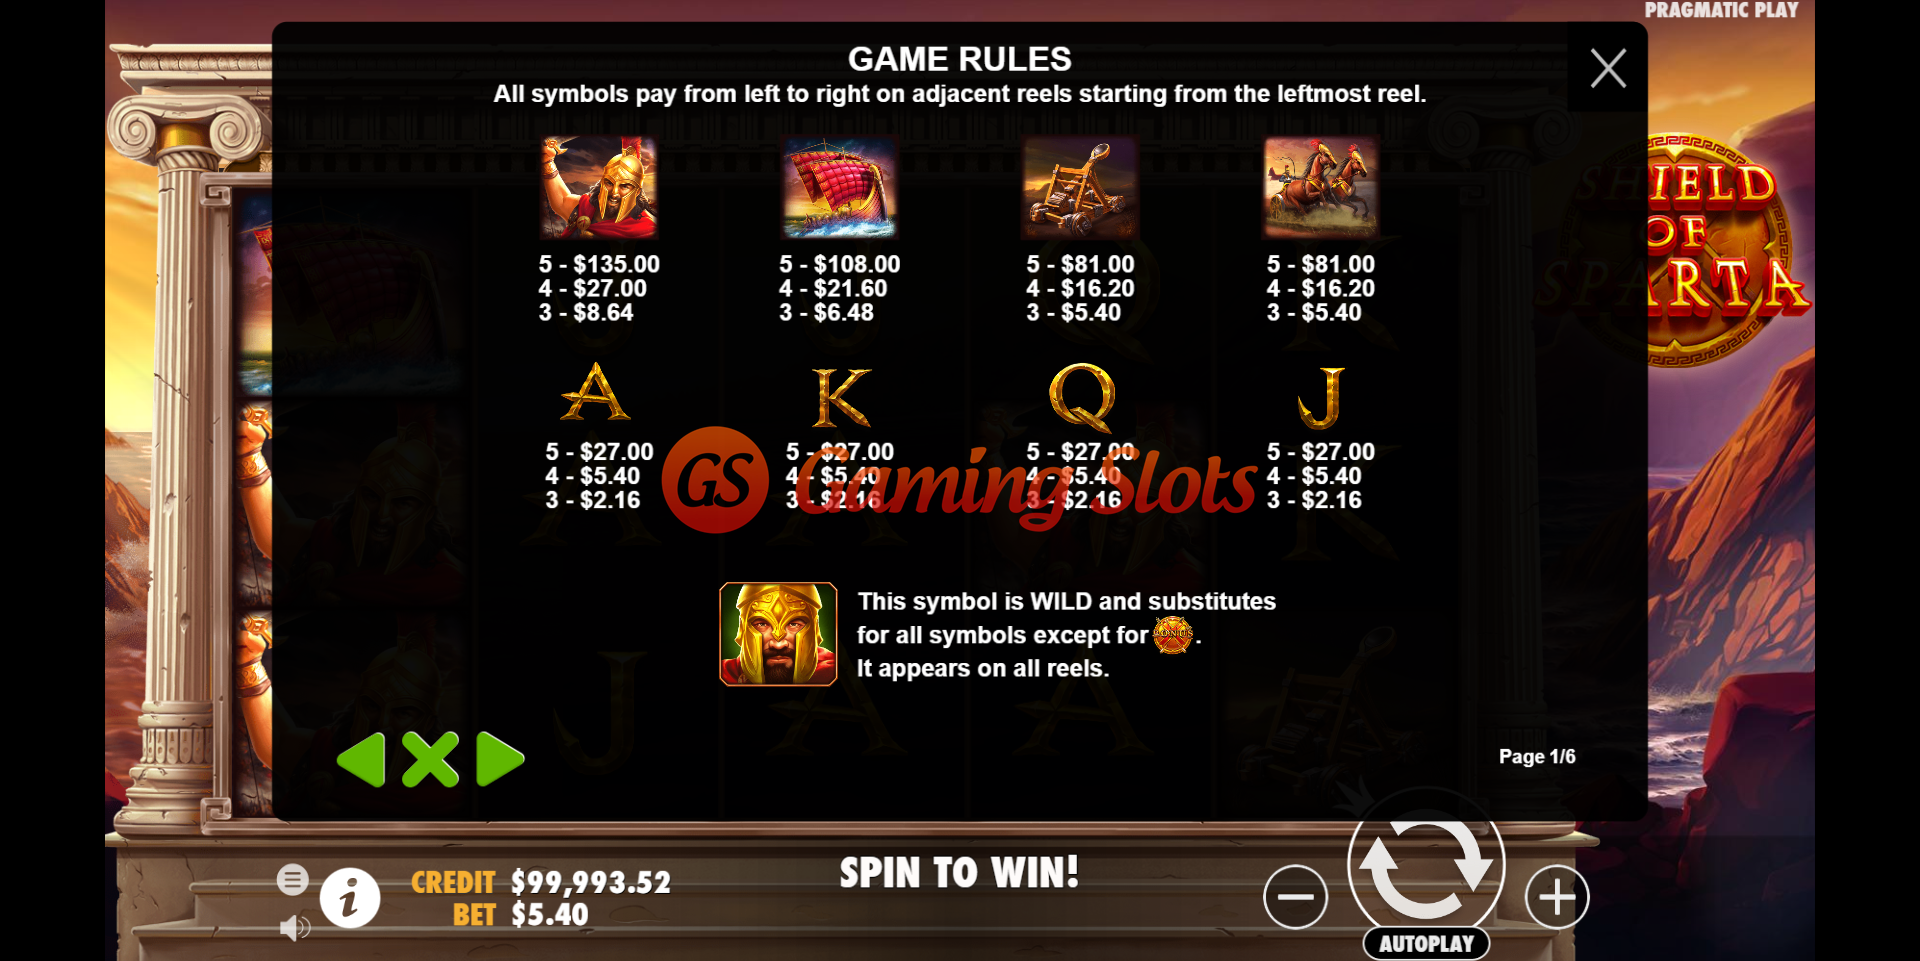 Game Rules for Shield of Sparta slot from Pragmatic Play